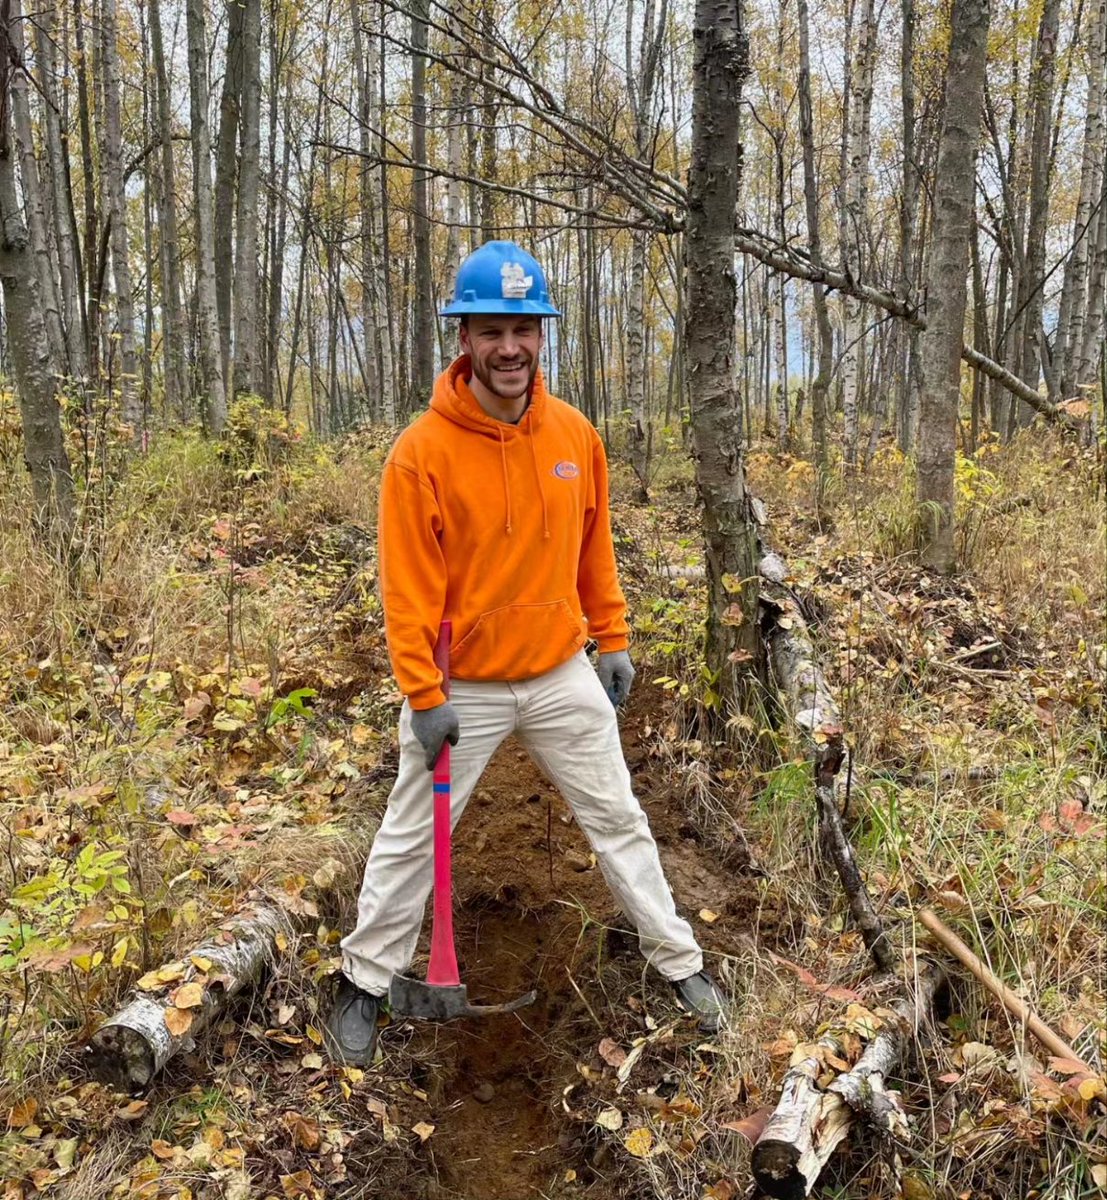 Did some digging and improved some drainage off the mountain bike trails in Russian Jack Springs Park yesterday along with Alaska Trails and a large group of volunteers! #AlaskaTrails #RussianJack #BikeAnchorage #Singletrack #akleg